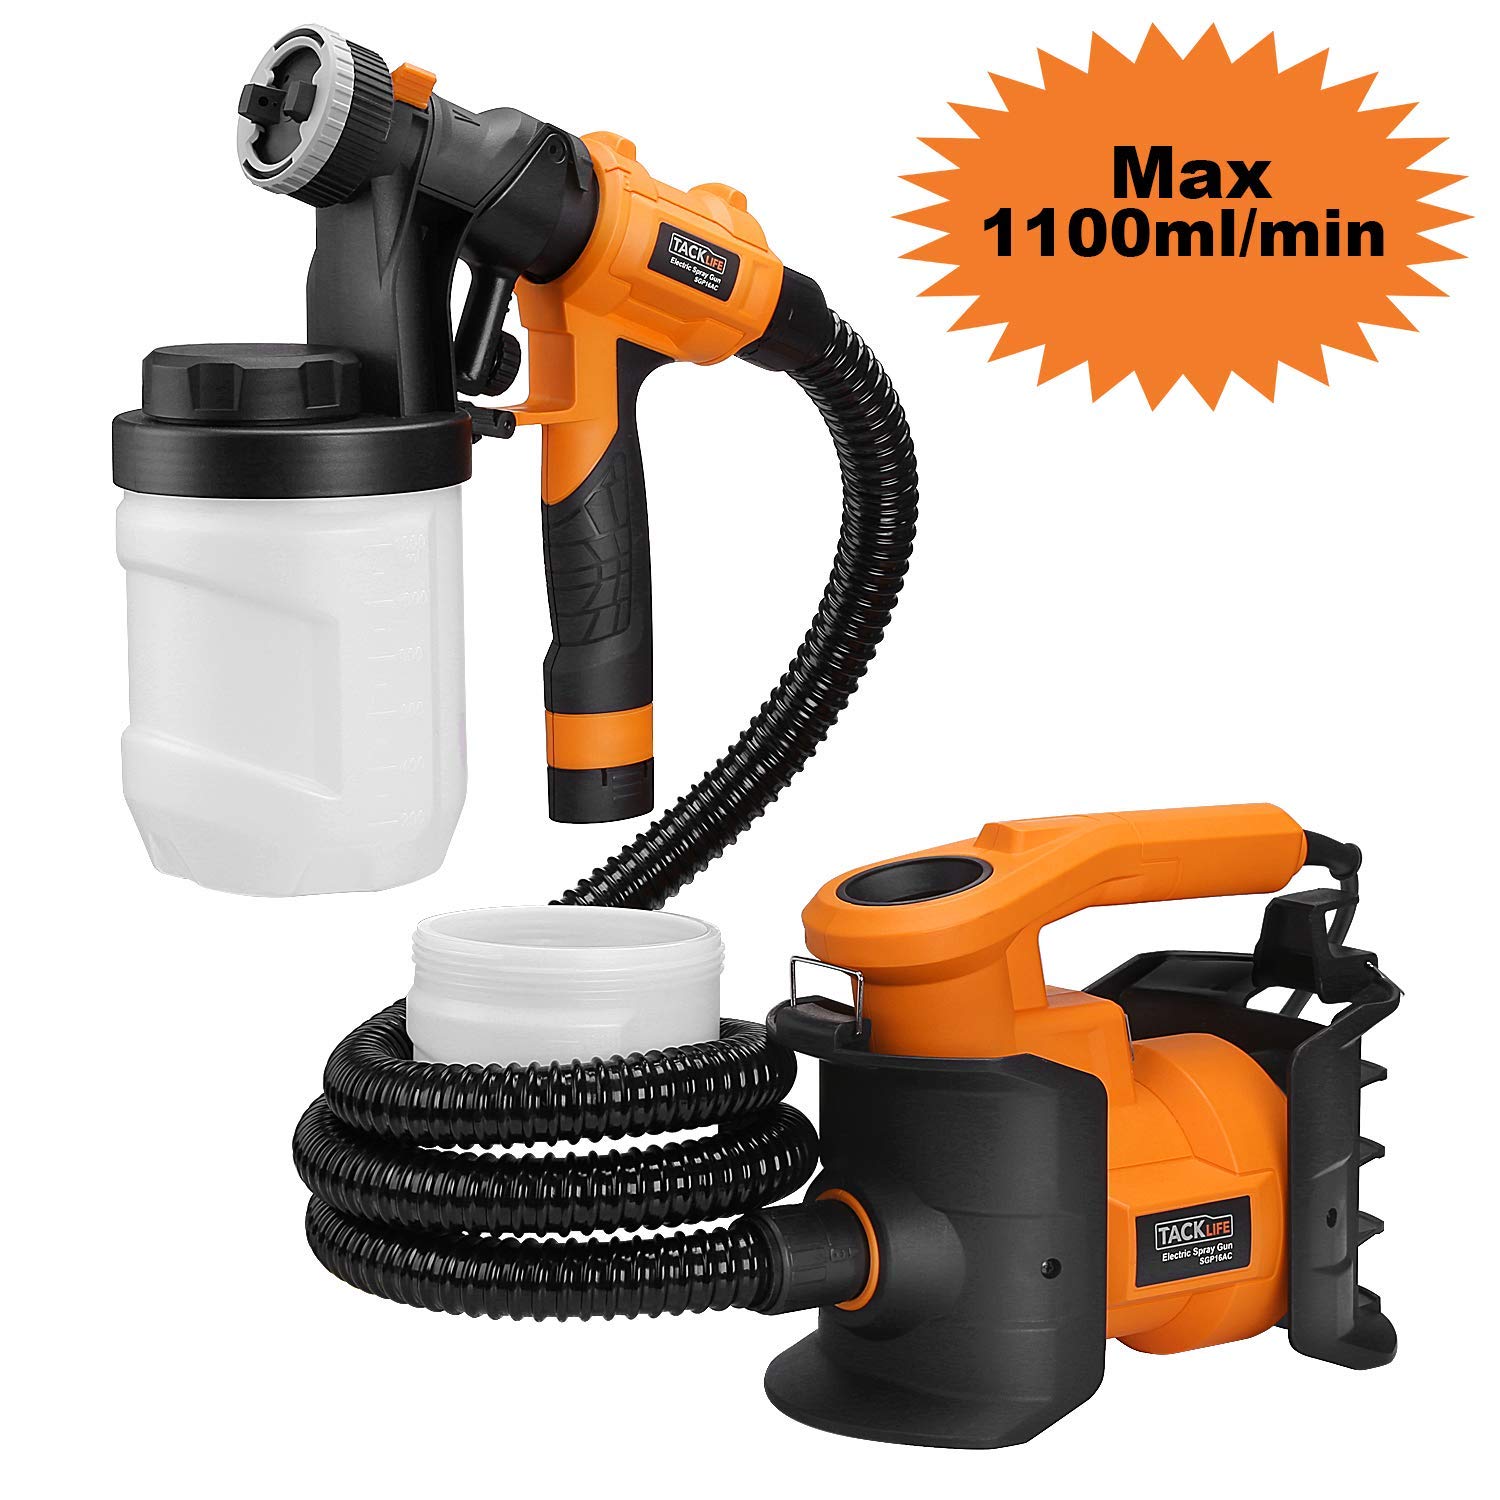 Paint Sprayer, Tacklife HVLP 1100ml/min,800W Paint Gun, with 2 X 1200ml Replaceable & Detachable Containers, Three Spray Patterns, Adjustable Valve Knobs for Indoor & Outdoor Precise Paint